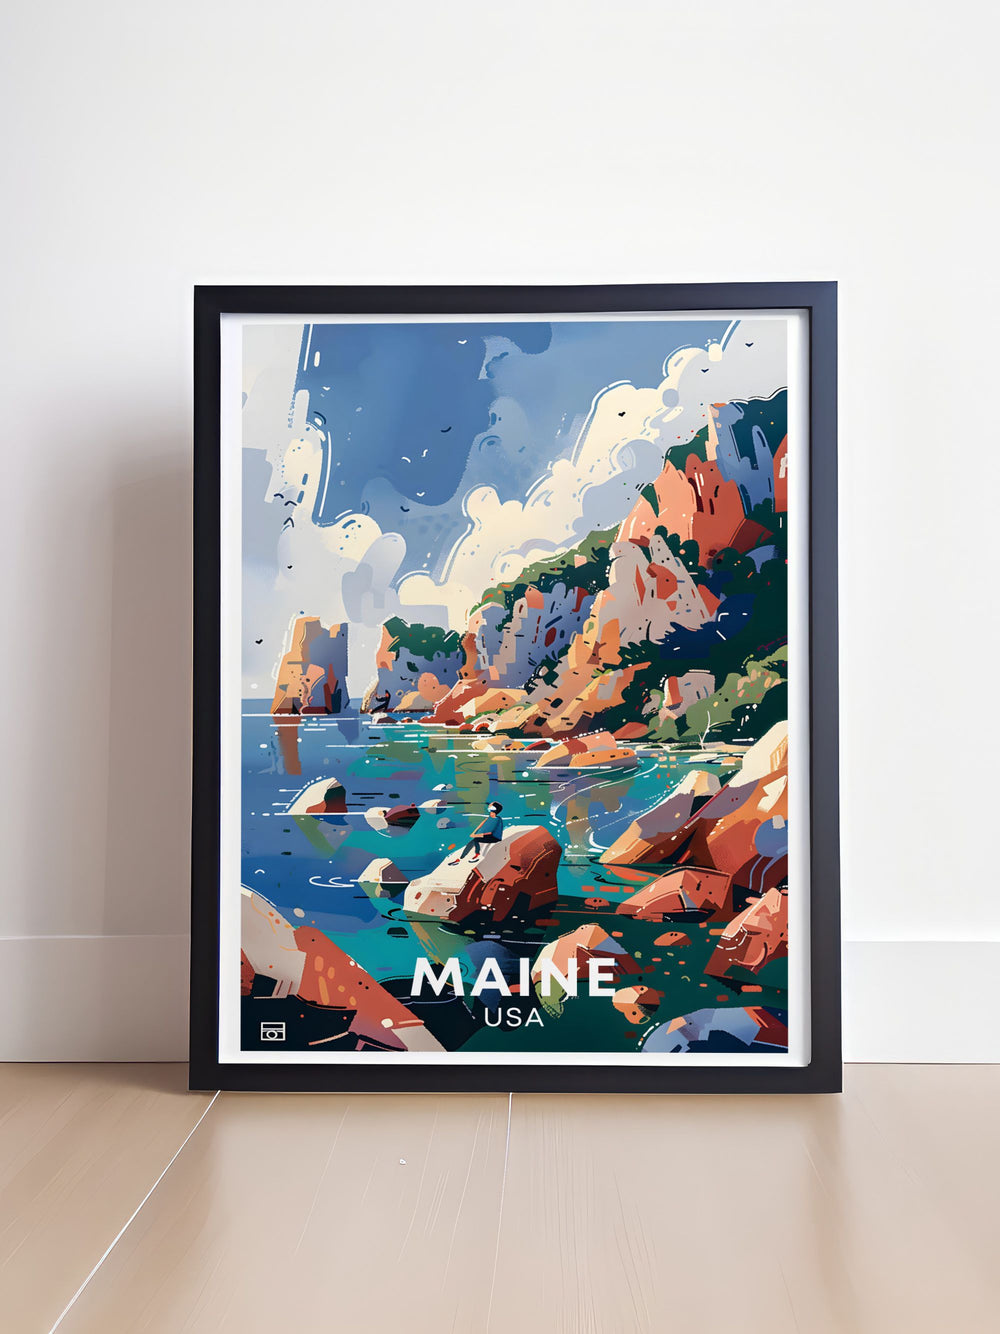 Highlighting the natural beauty and rich history of Acadia National Park, this poster captures the essence of Maines most iconic national park. Perfect for those who appreciate preserved landscapes and historical significance, this artwork brings the charm of Acadia into your home decor.